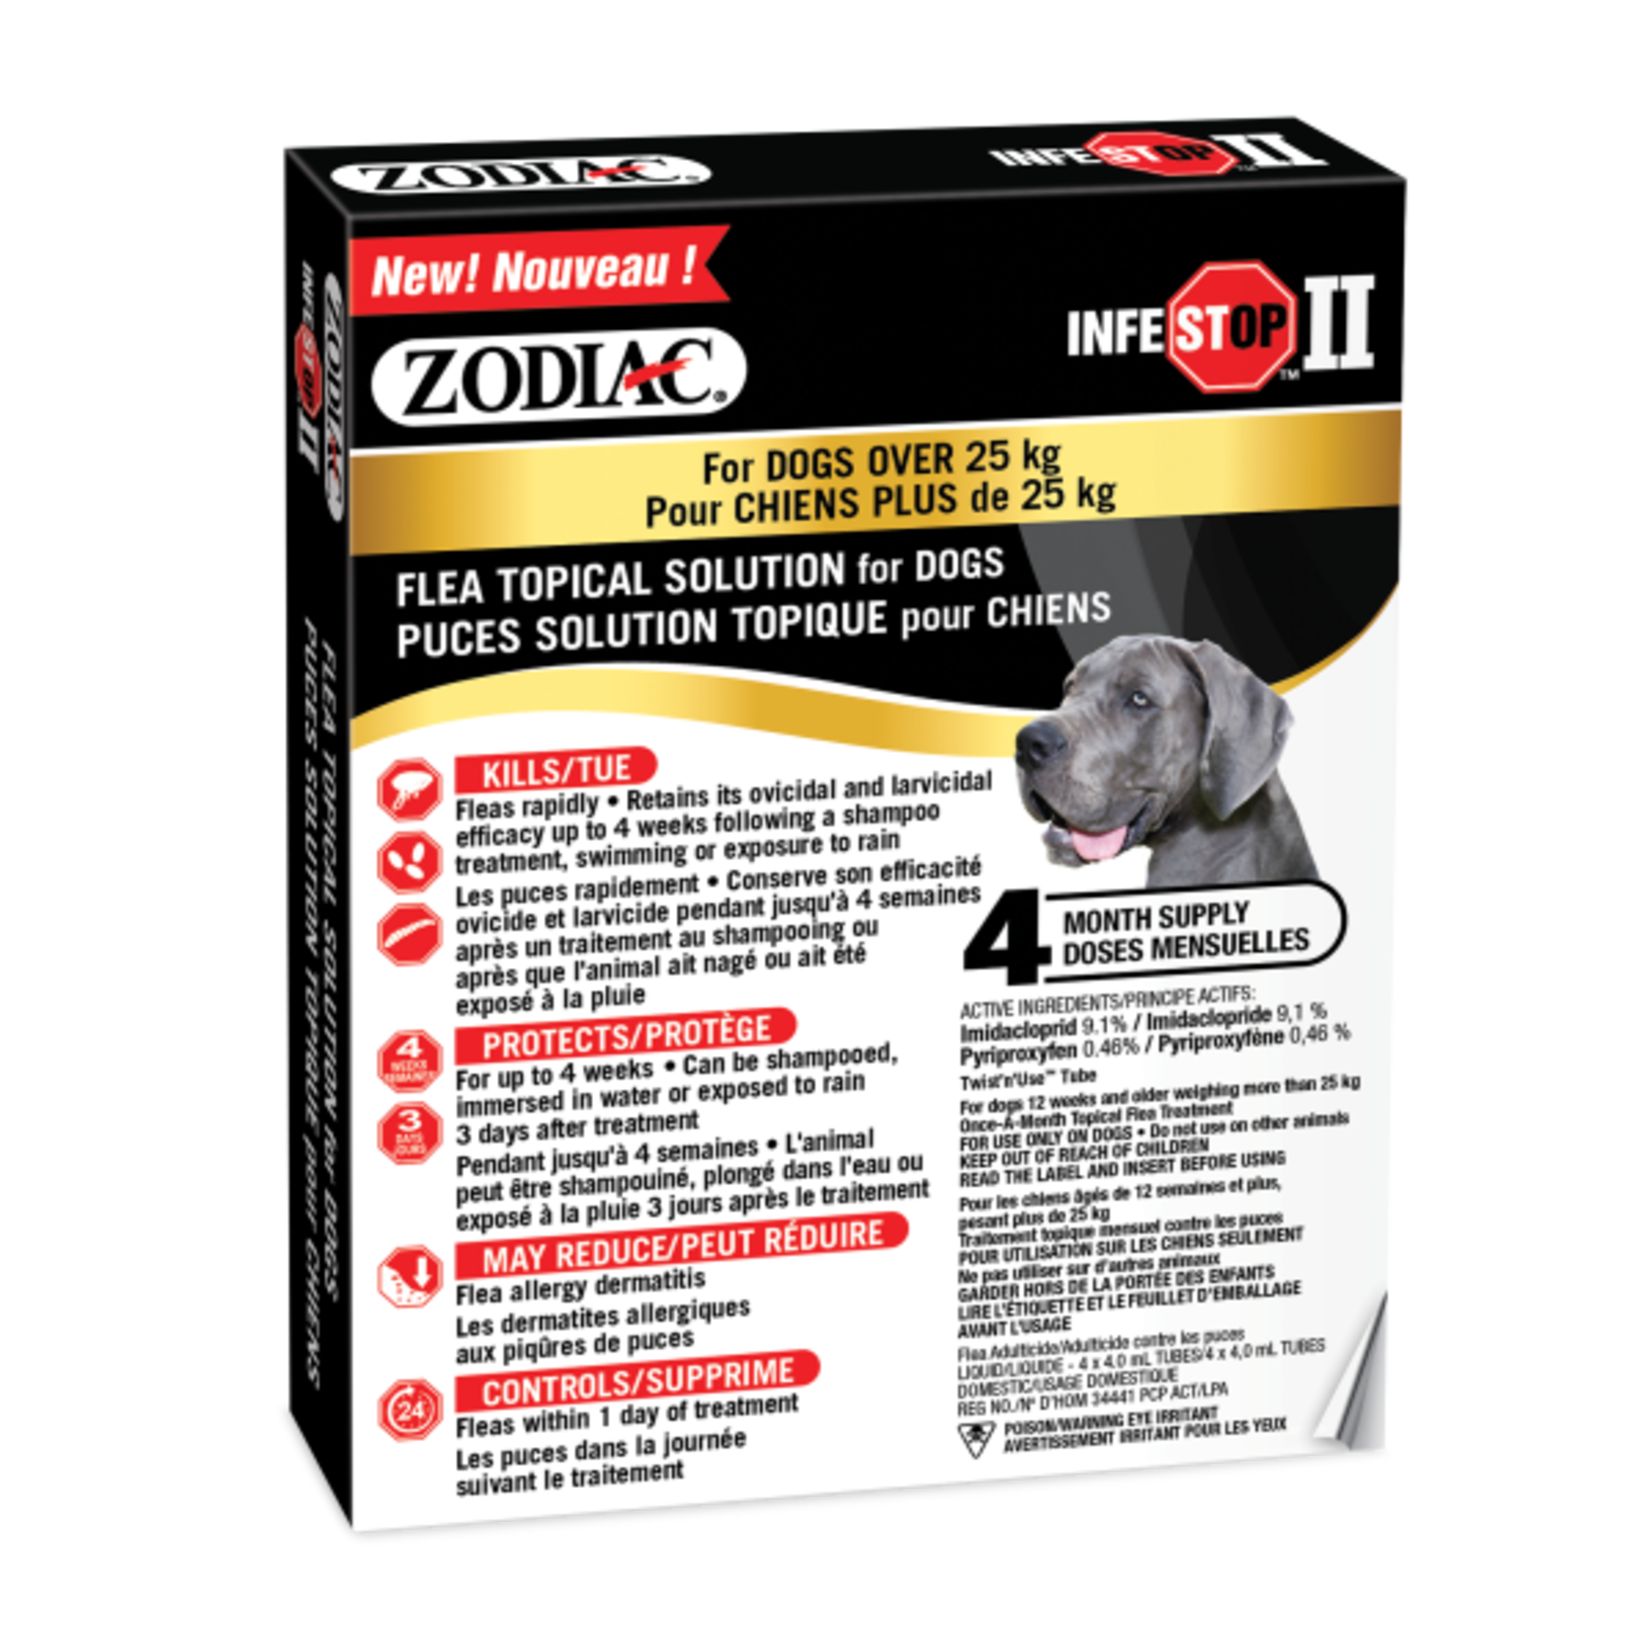 Zodiac Infestop II Topical Dogs over 25 kg